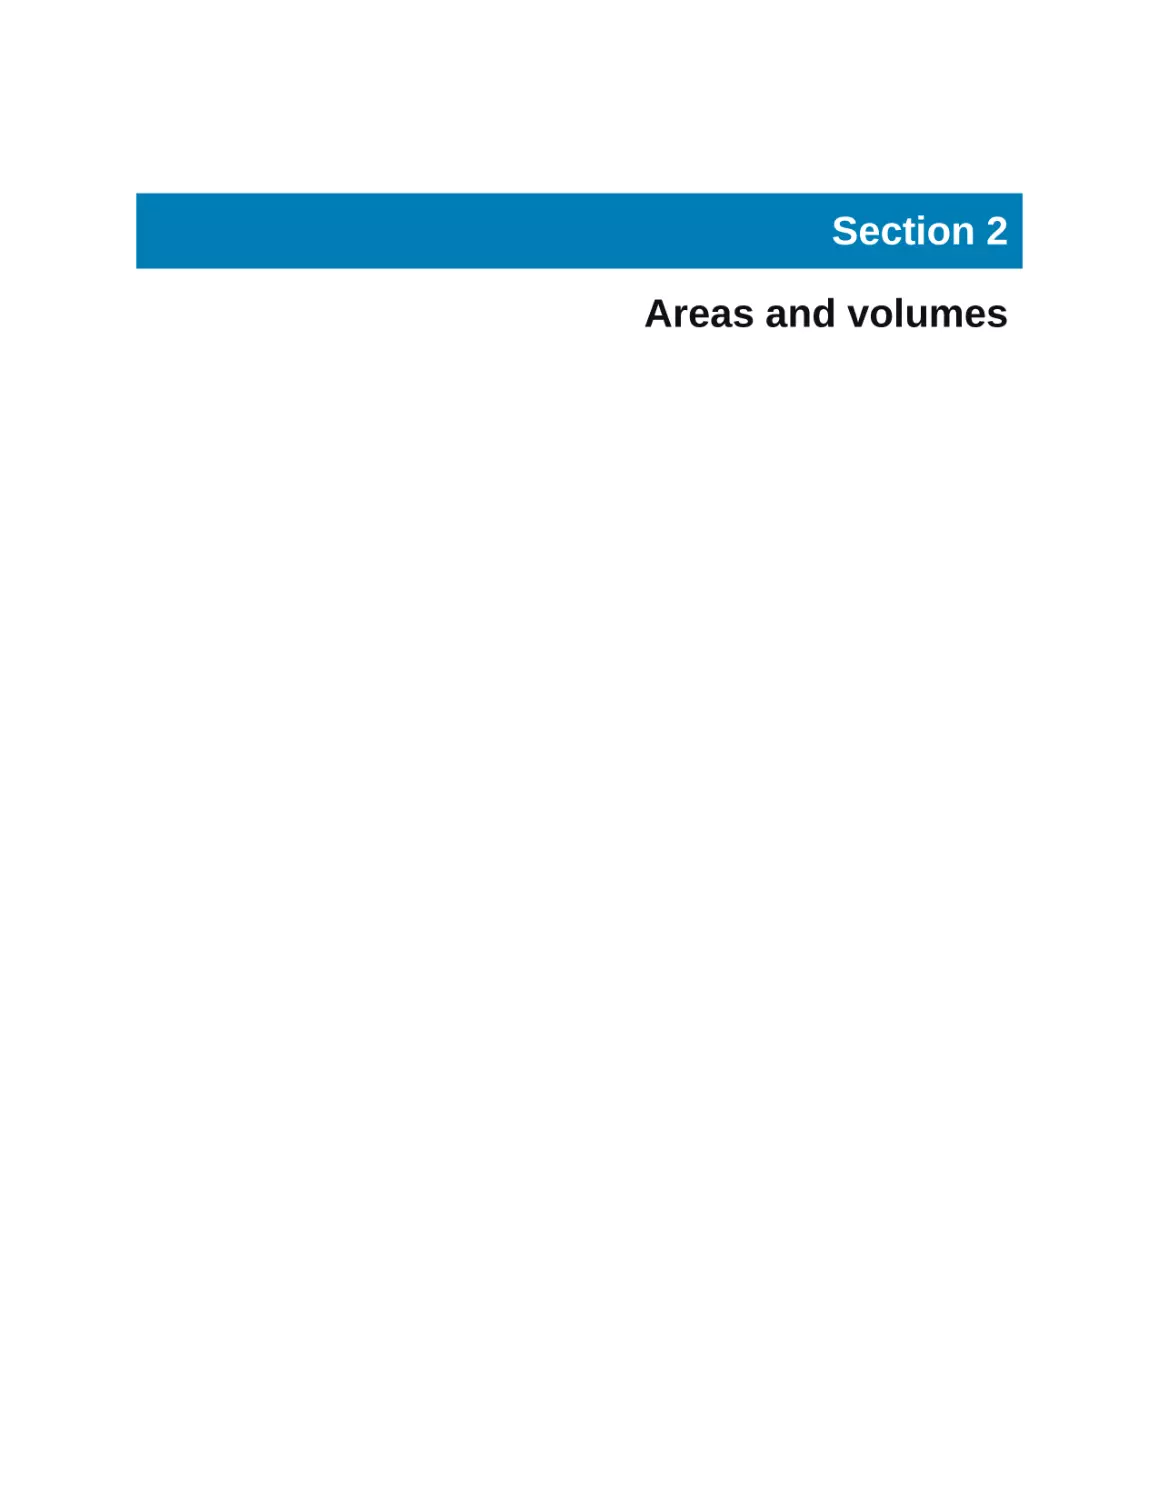 Section 2 Areas and volumes